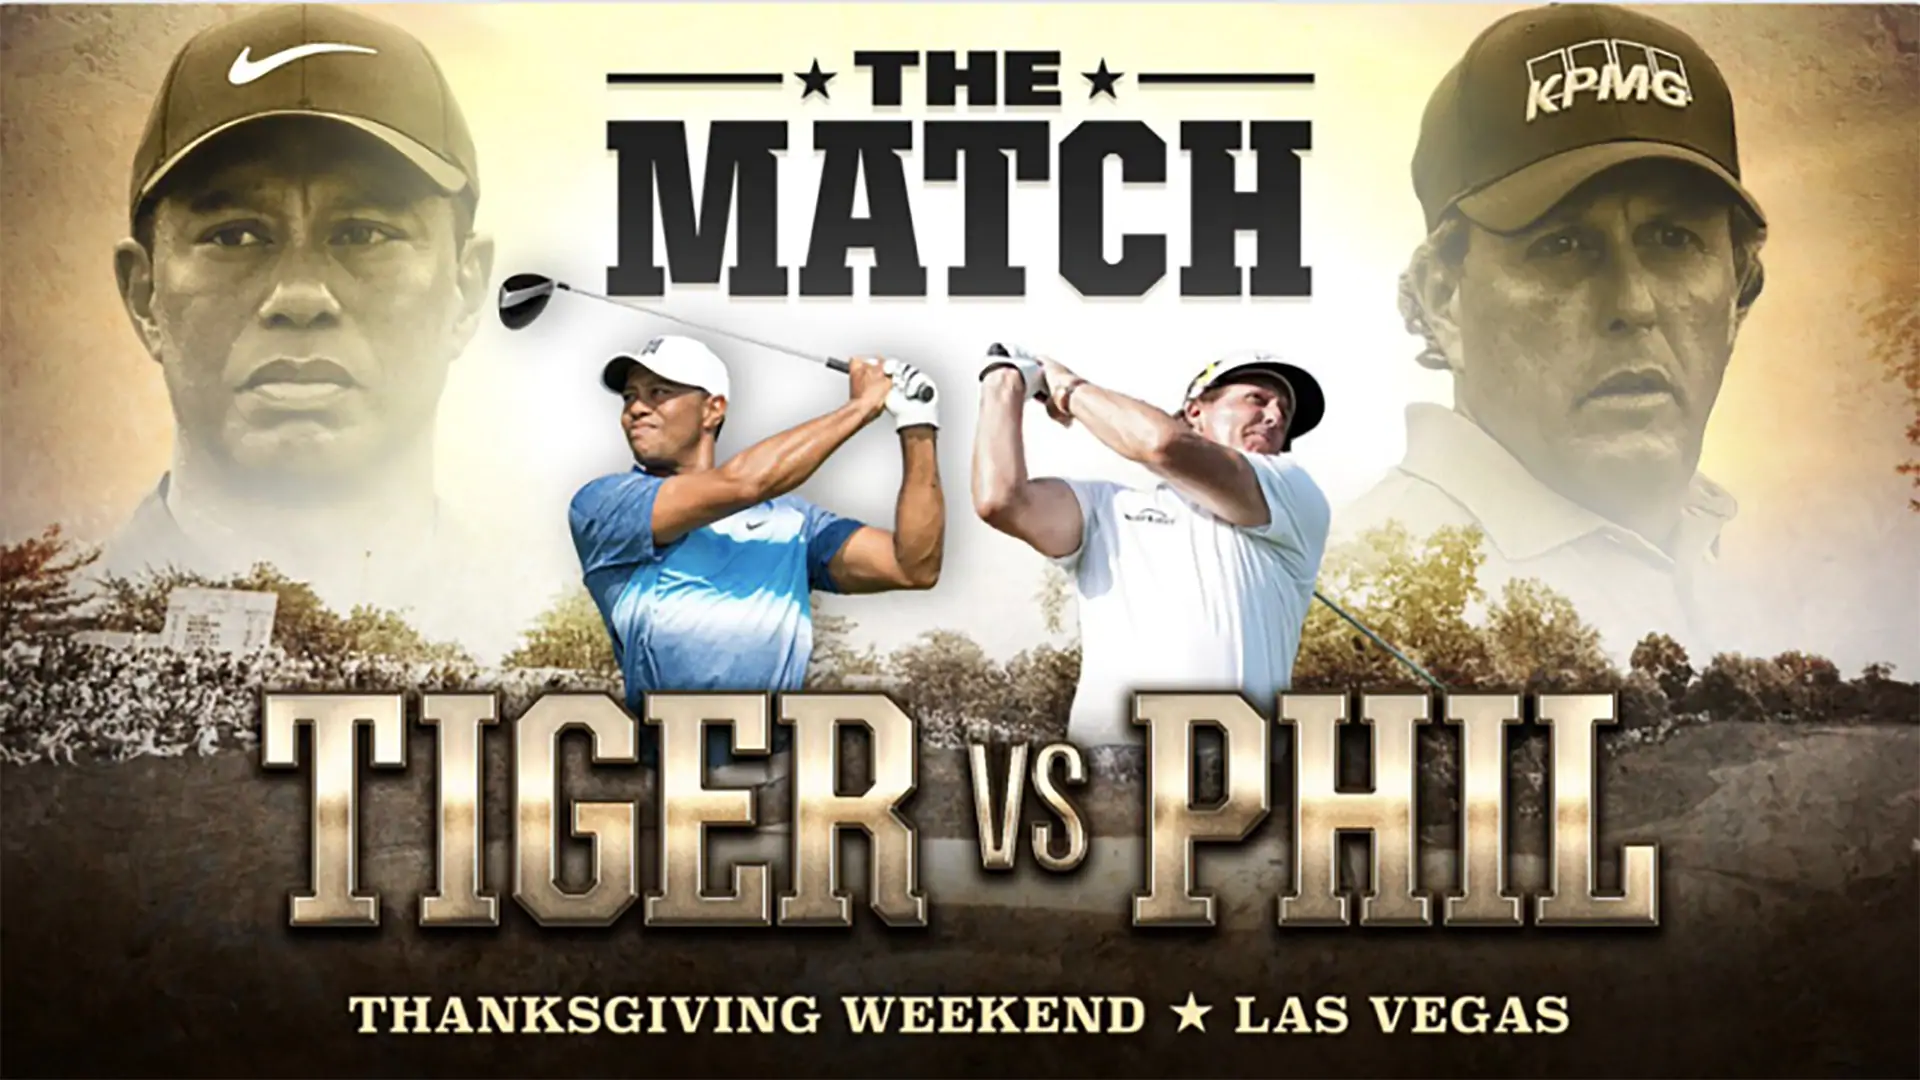 Report: No tickets available for Tiger-Phil PPV match